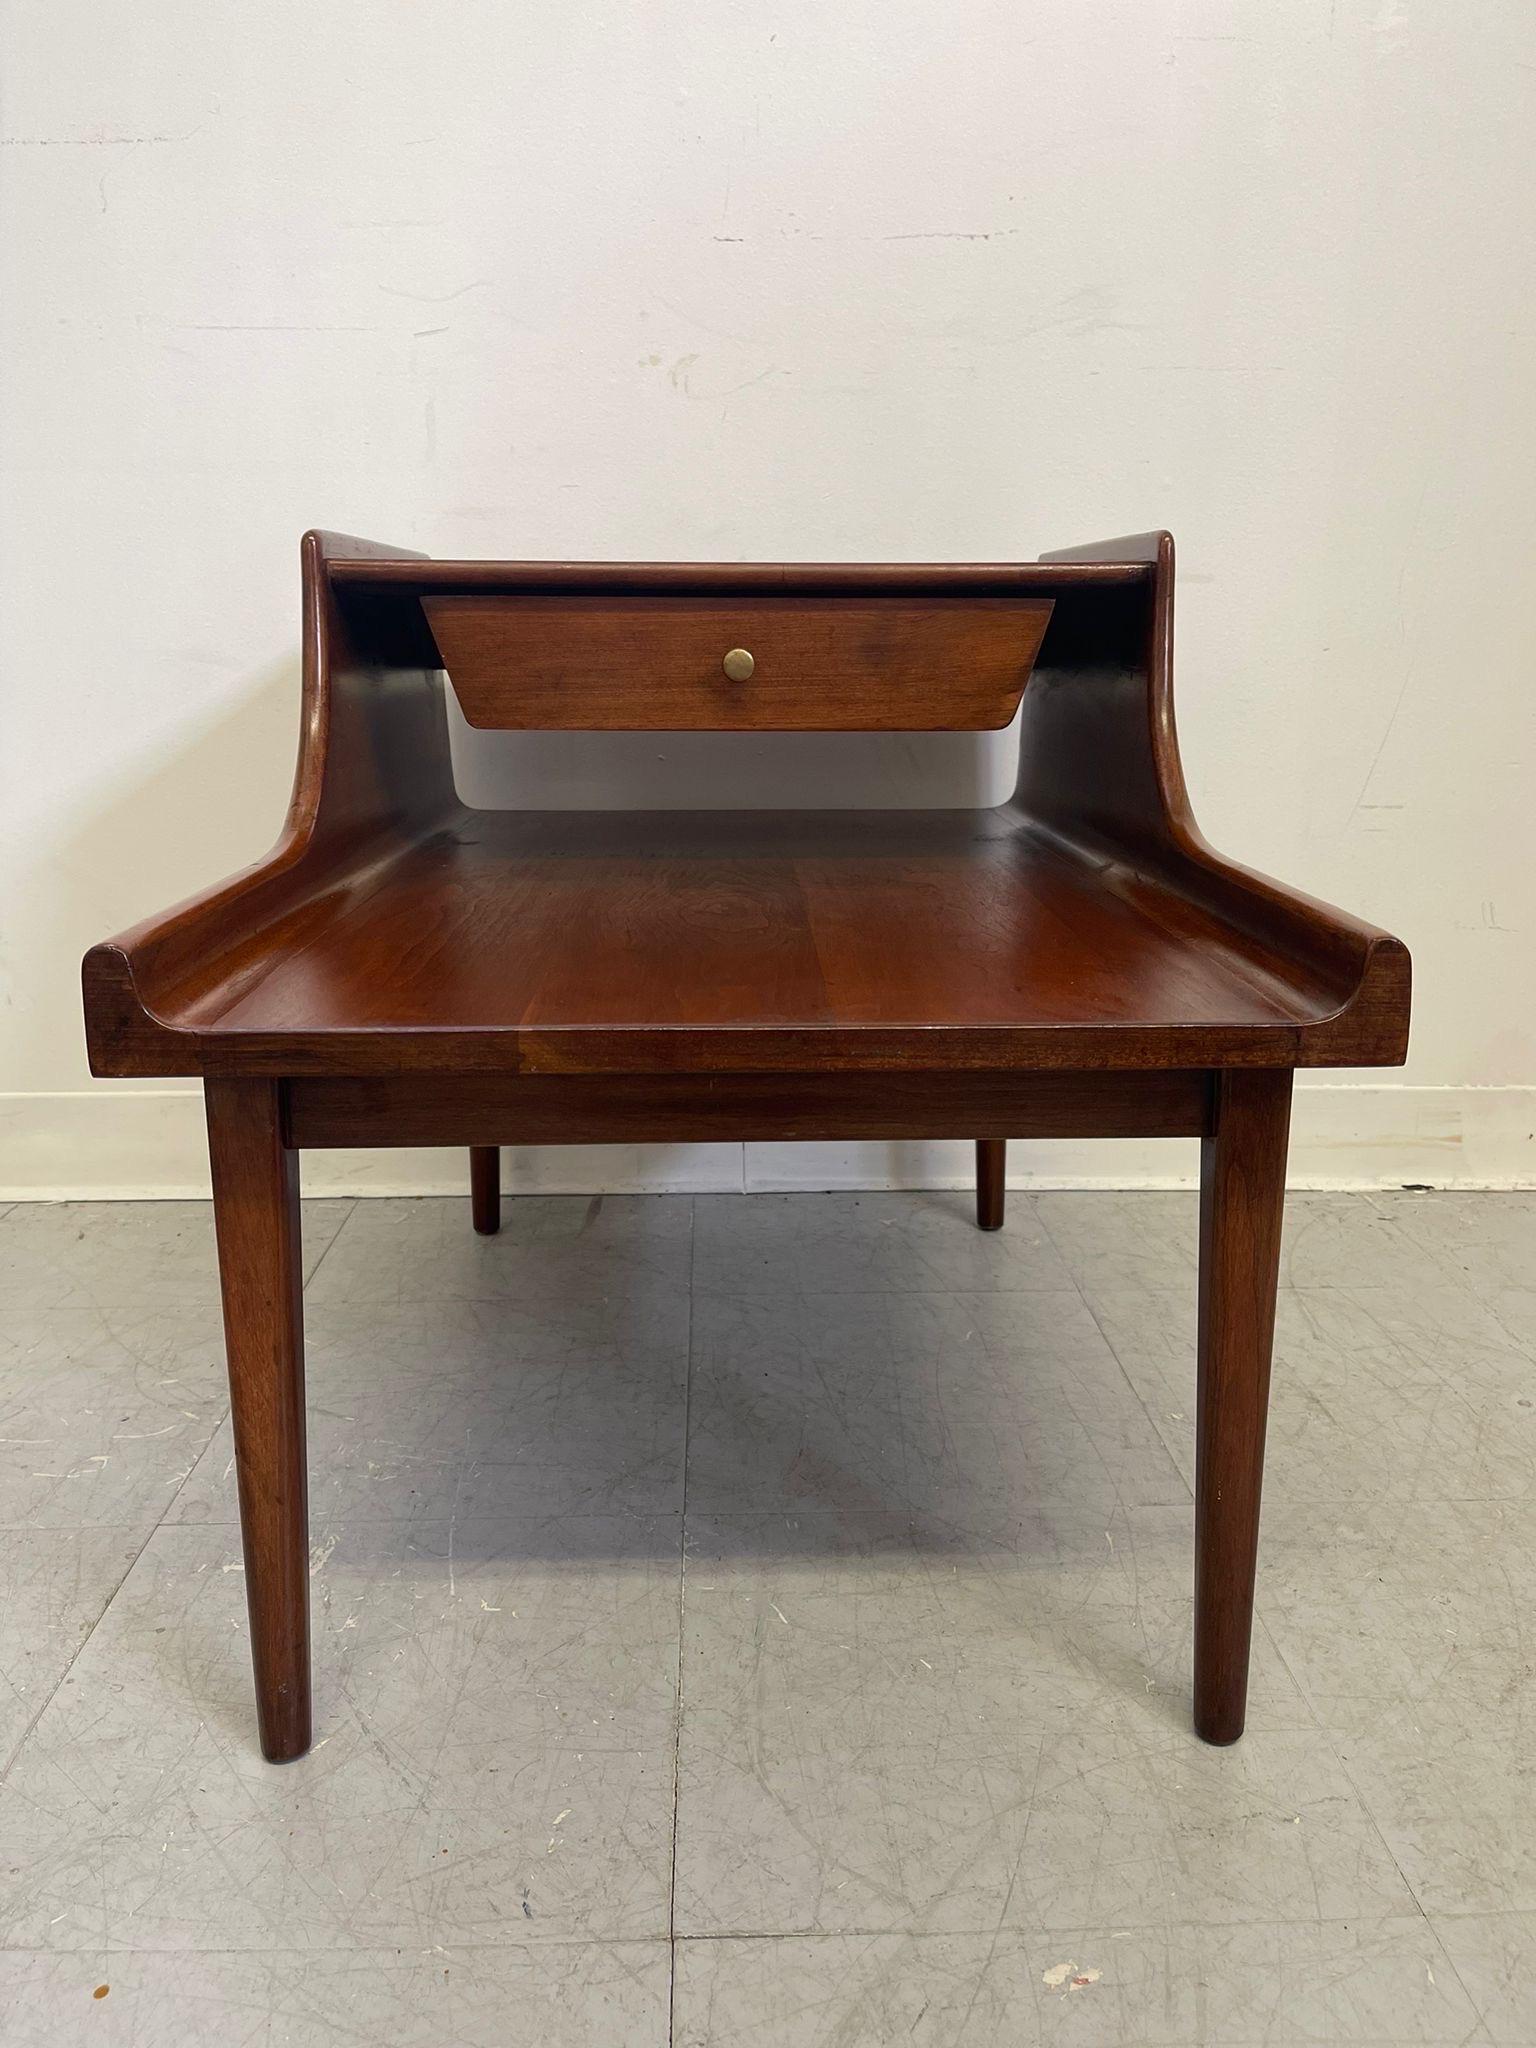 This End Table has beautiful sculpted wood Accents and walnut tone. Single dovetailed drawer with makers mark inside. Brass toned Hardware. Vintage Condition Consistent with Age as Pictured.

Dimensions. 29 W ; 20 D ; 15 H to first shelf
           